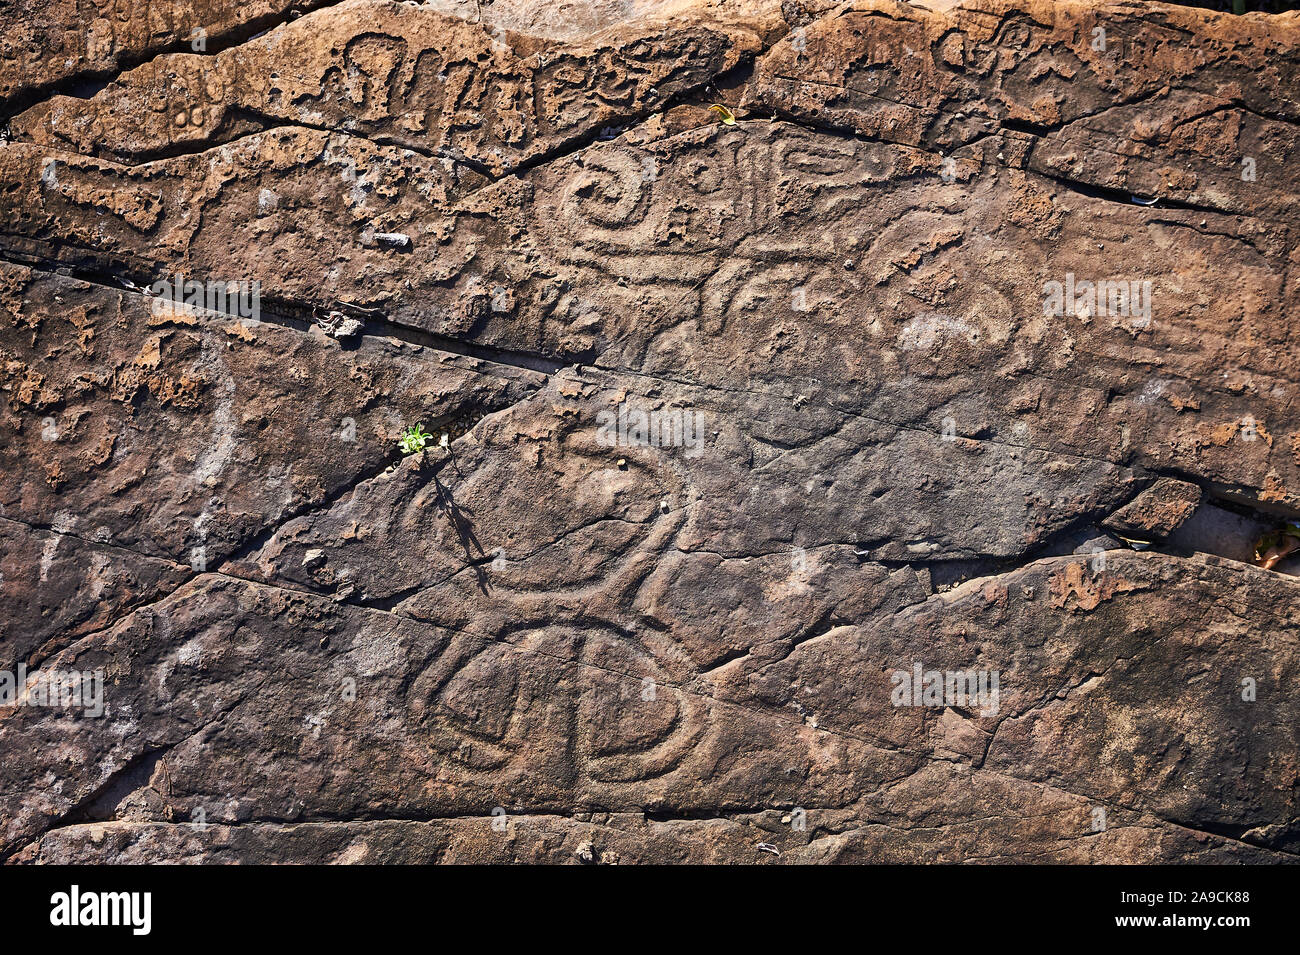 Rock paintings of ancient civilizations. Made by the aborigines of Central America by the Taino Indians. Includes ancient letters, signs and symbols. Stock Photo